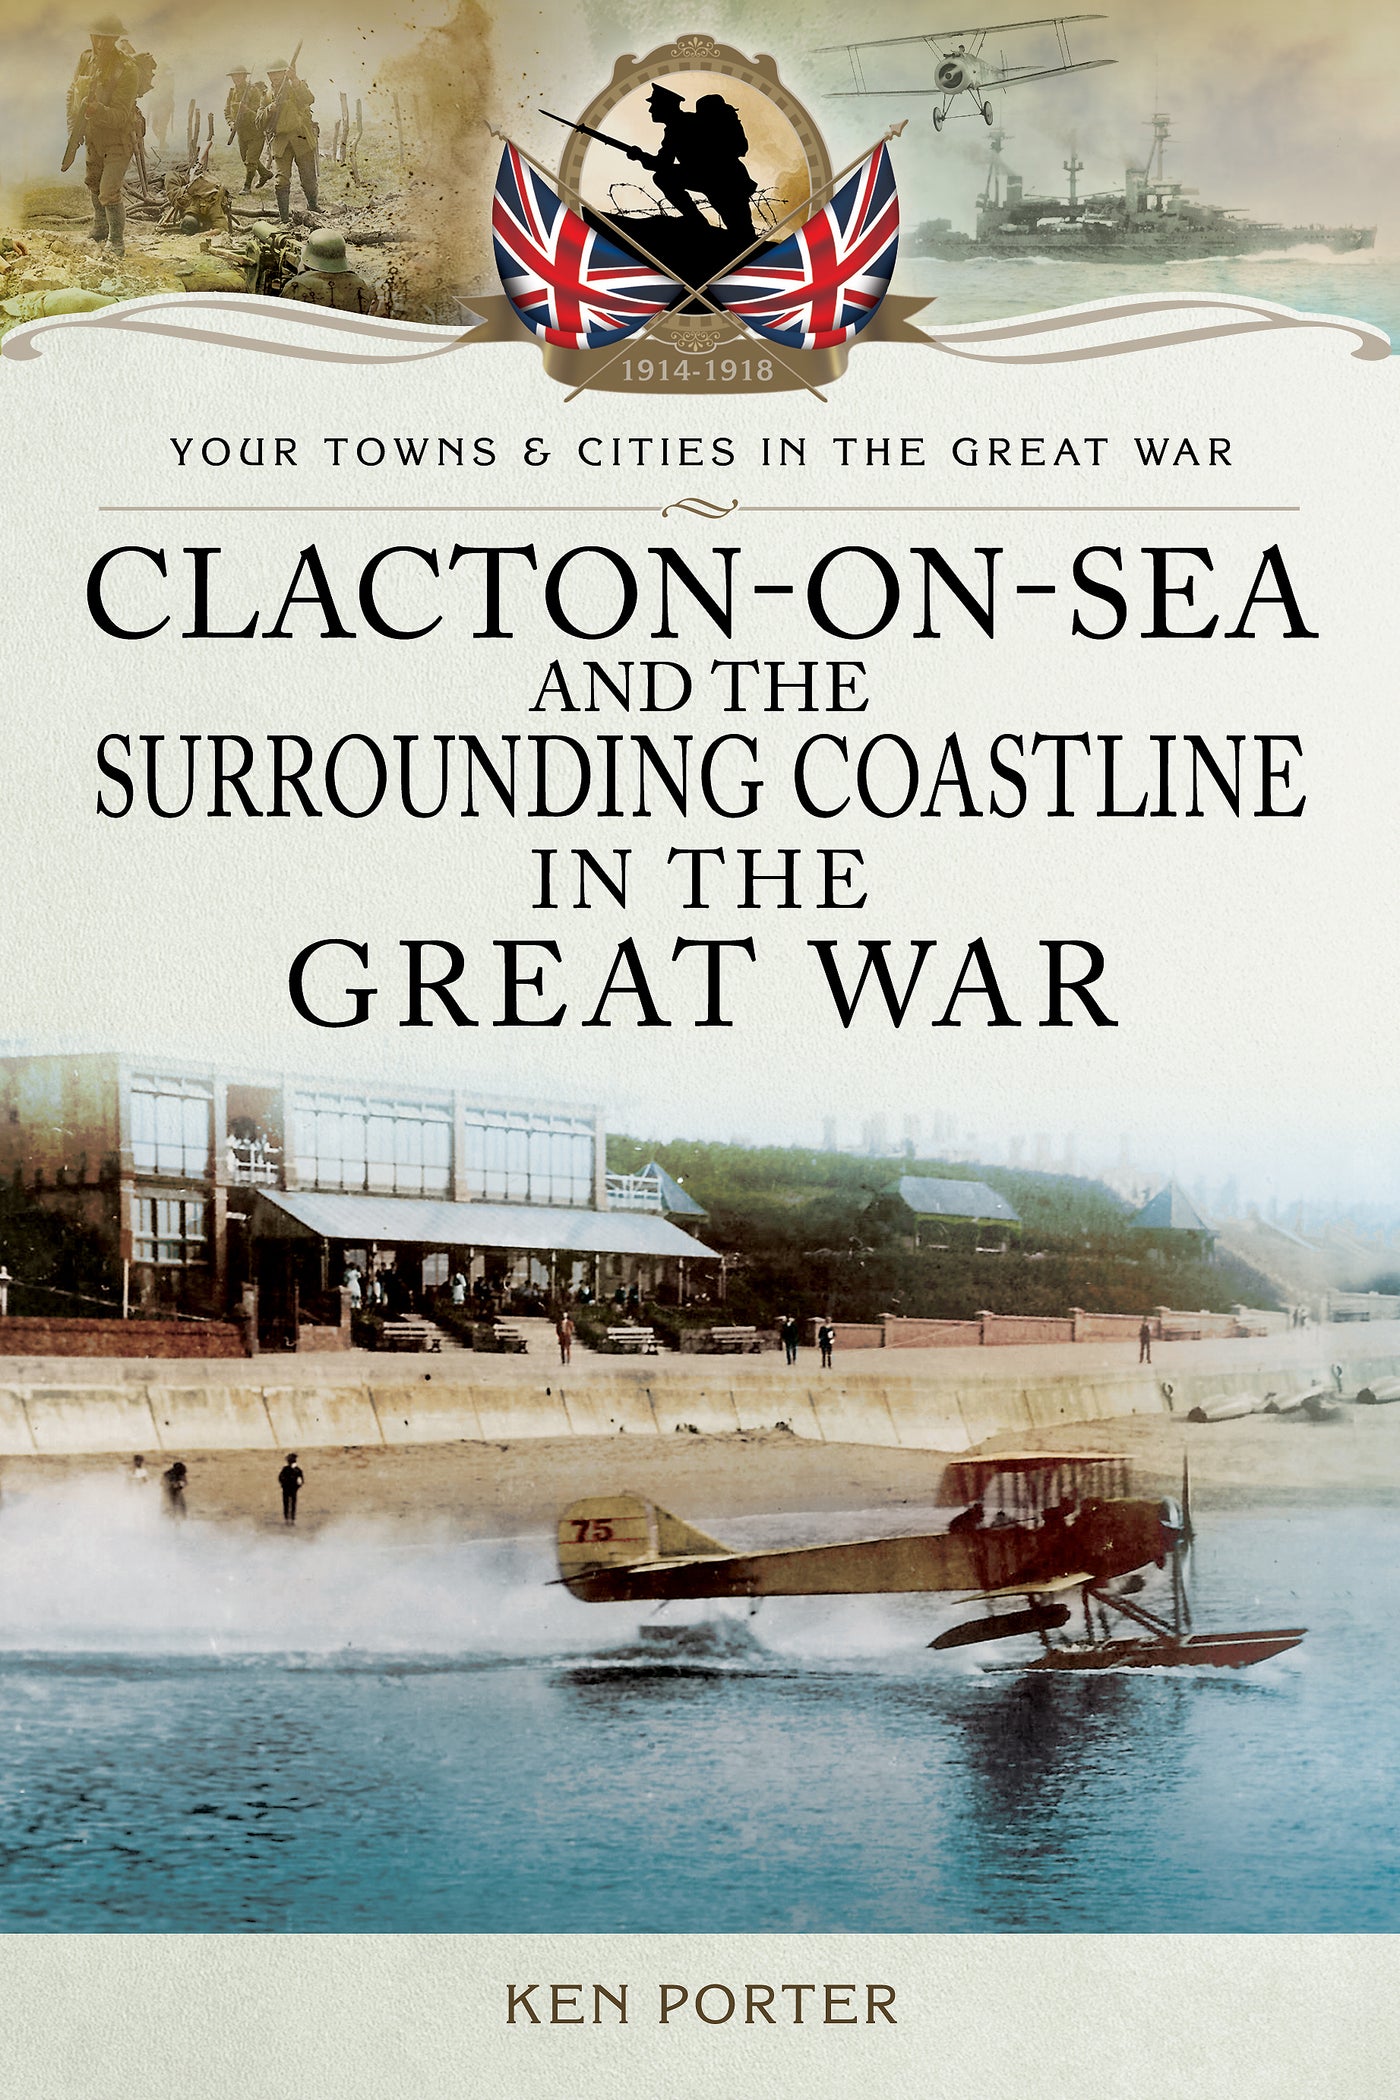 Clacton-on-Sea and the Surrounding Coastline in the Great War